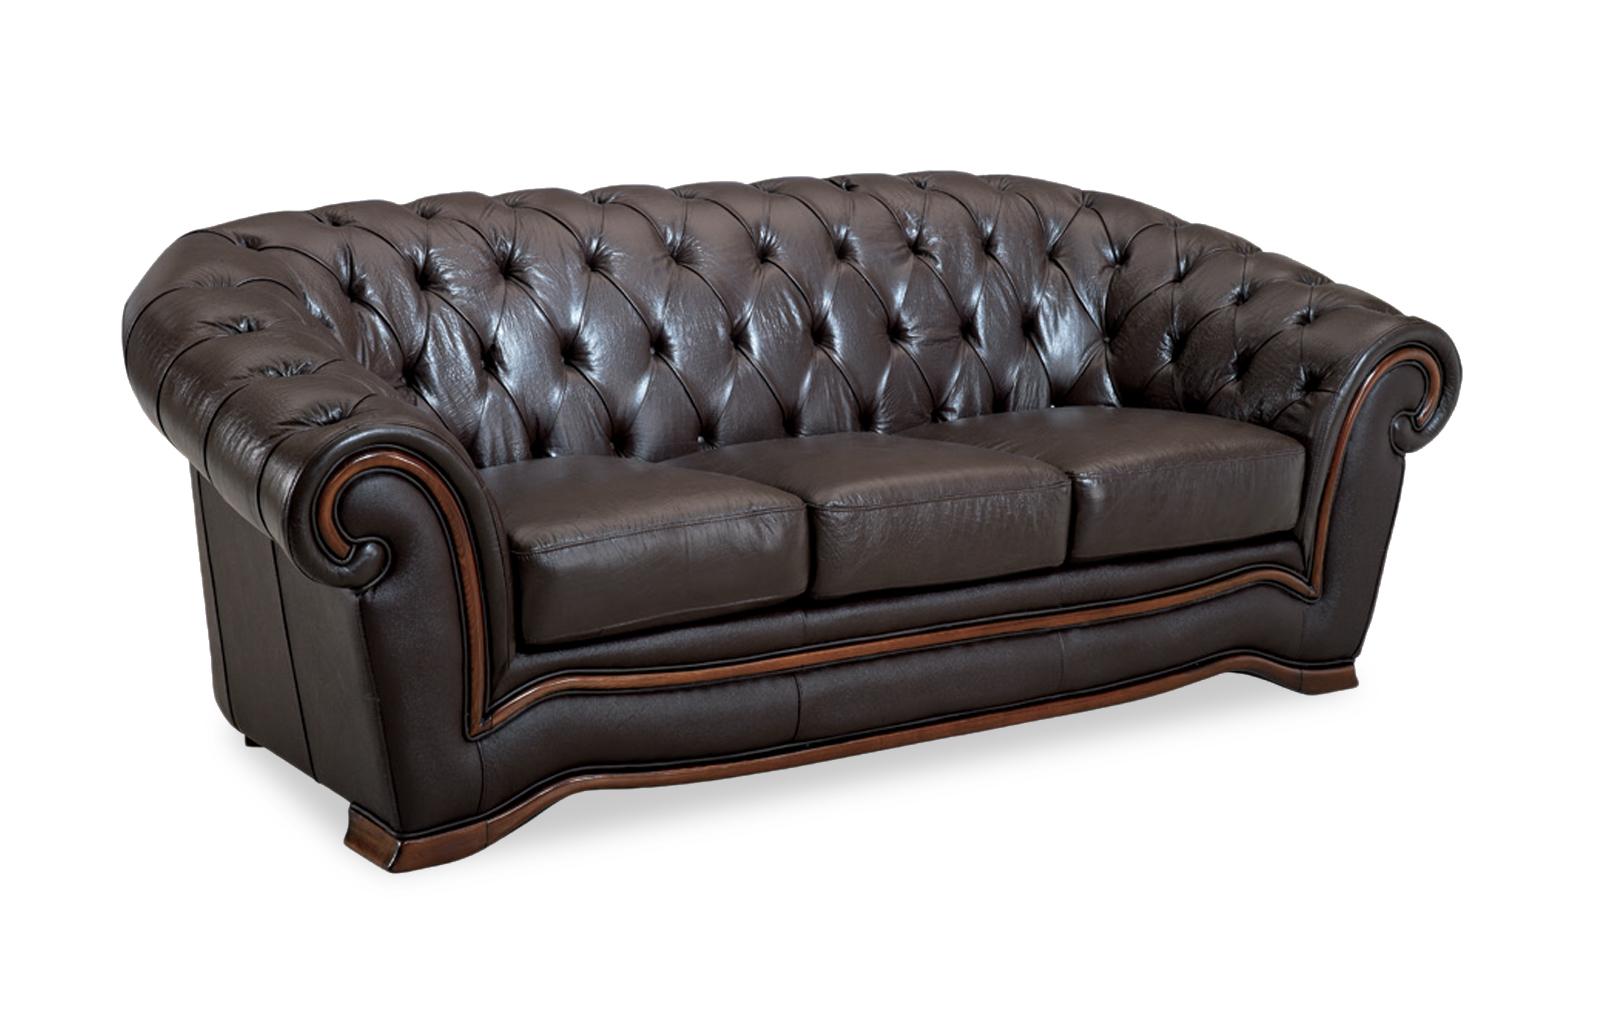 Contemporary Sofa Loveseat and Chair Set 262 Full Leather ESF-262-3PC in Dark Brown Leather